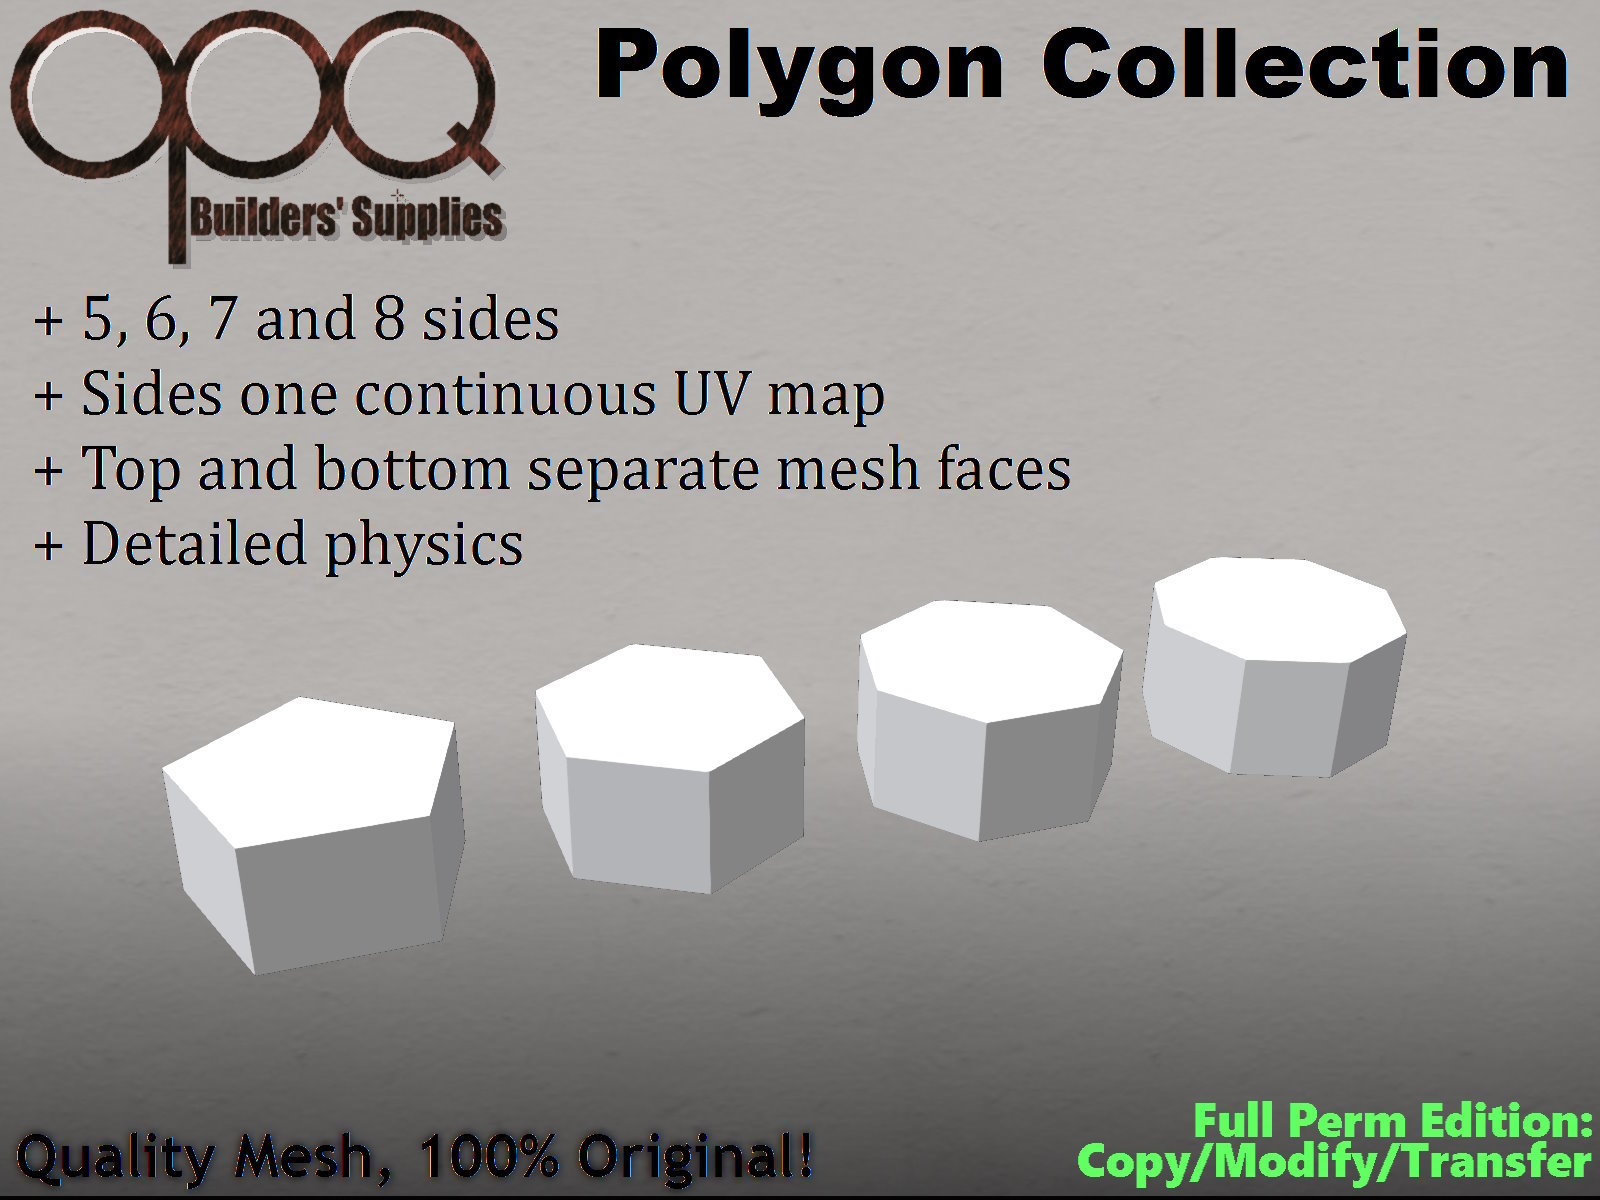 OPQ Polygon Collection poster.jpg